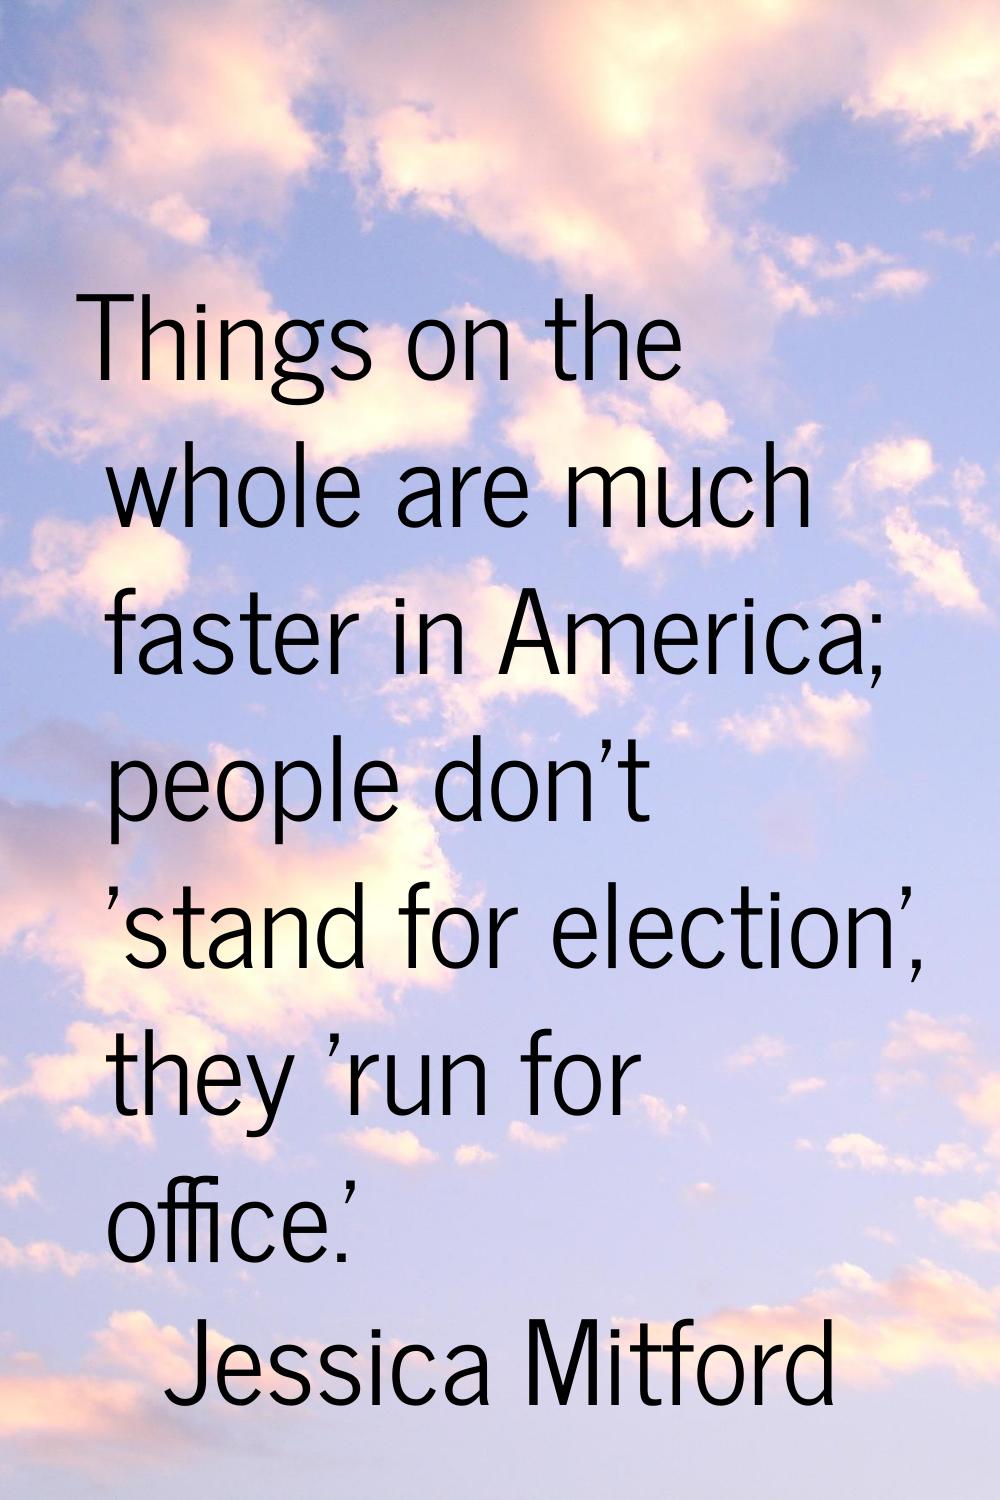 Things on the whole are much faster in America; people don't 'stand for election', they 'run for of